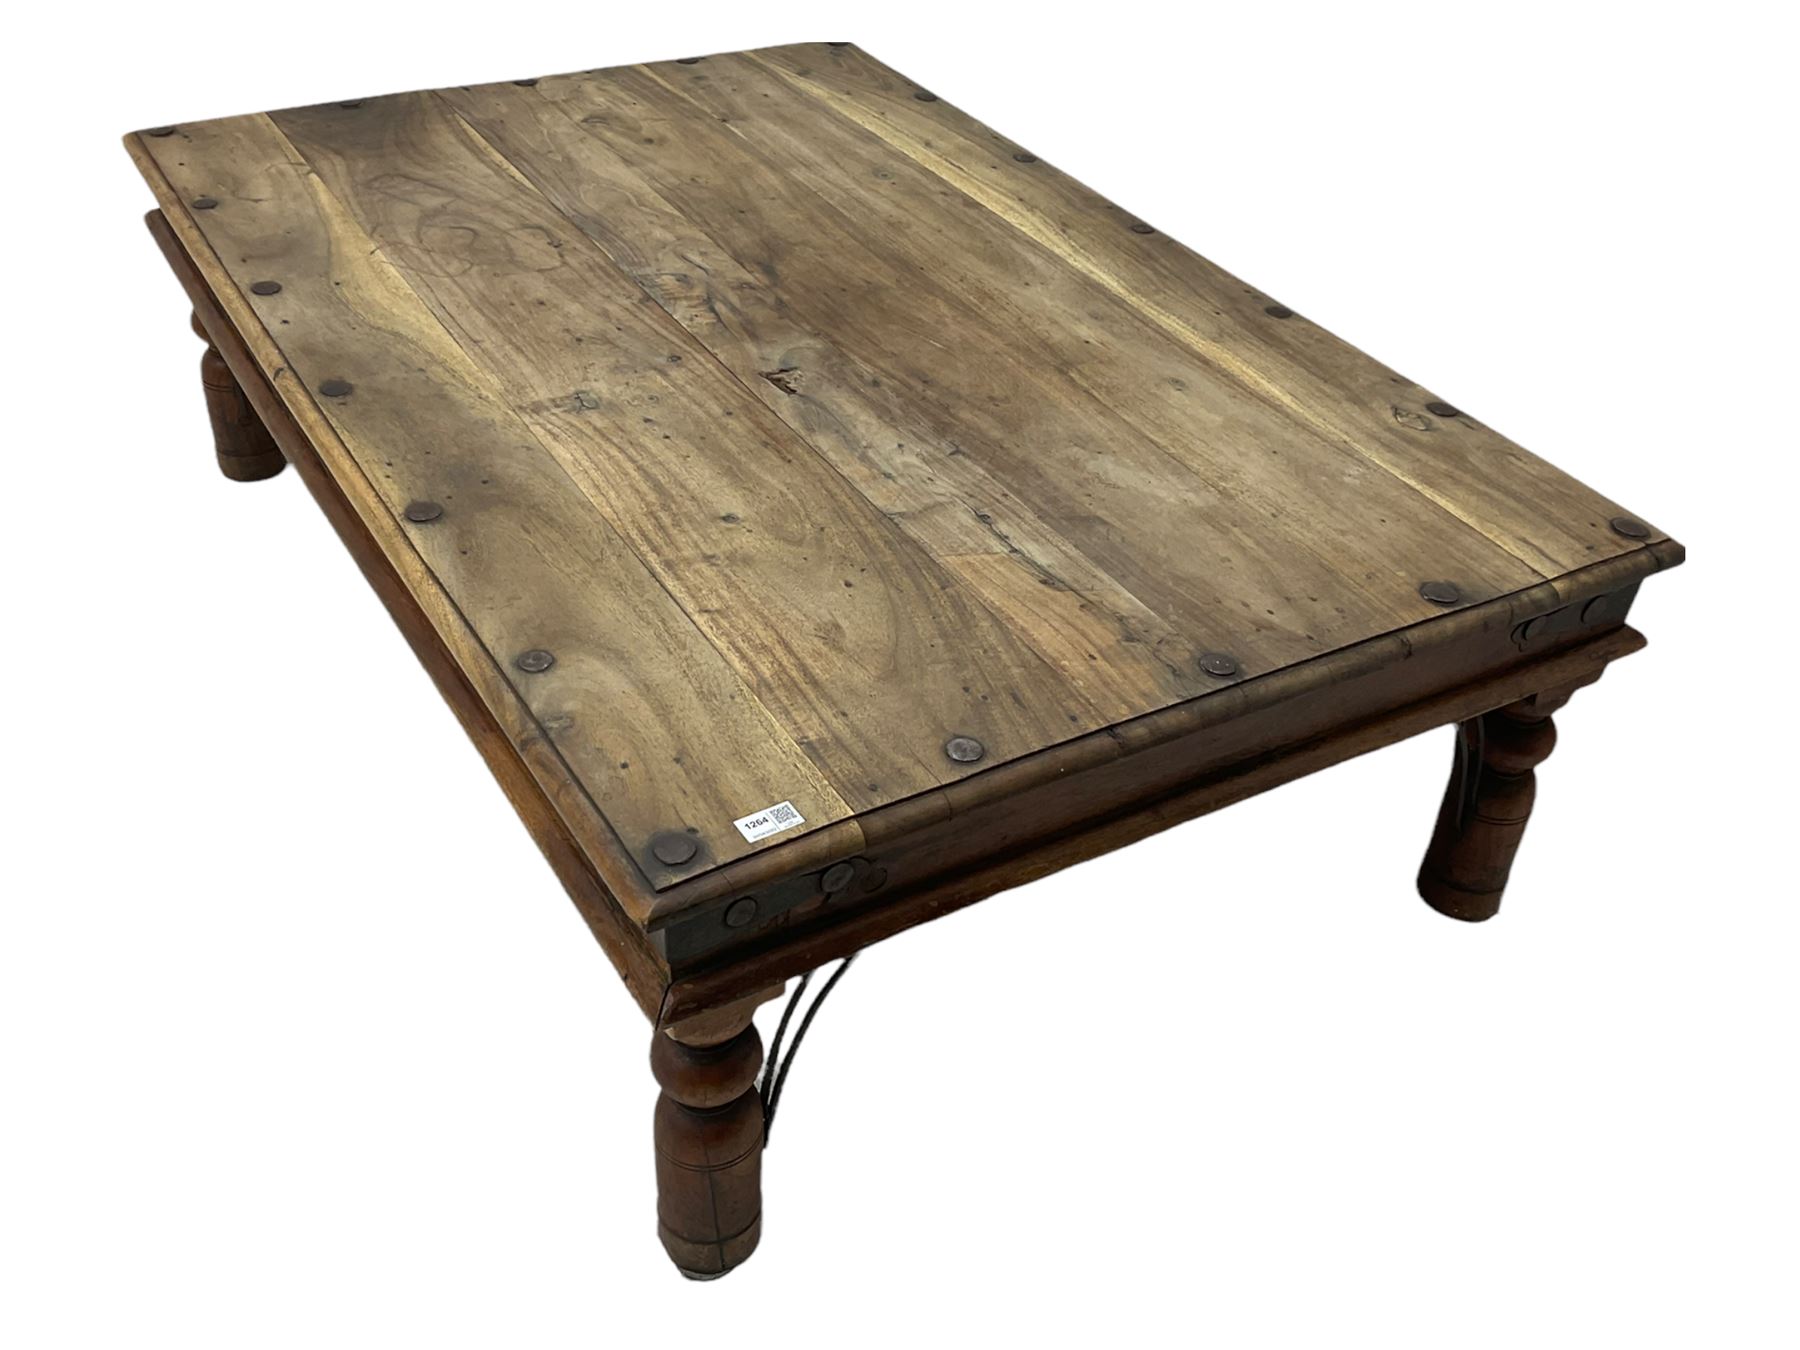 Mexican pine rectangular coffee table - Image 4 of 4